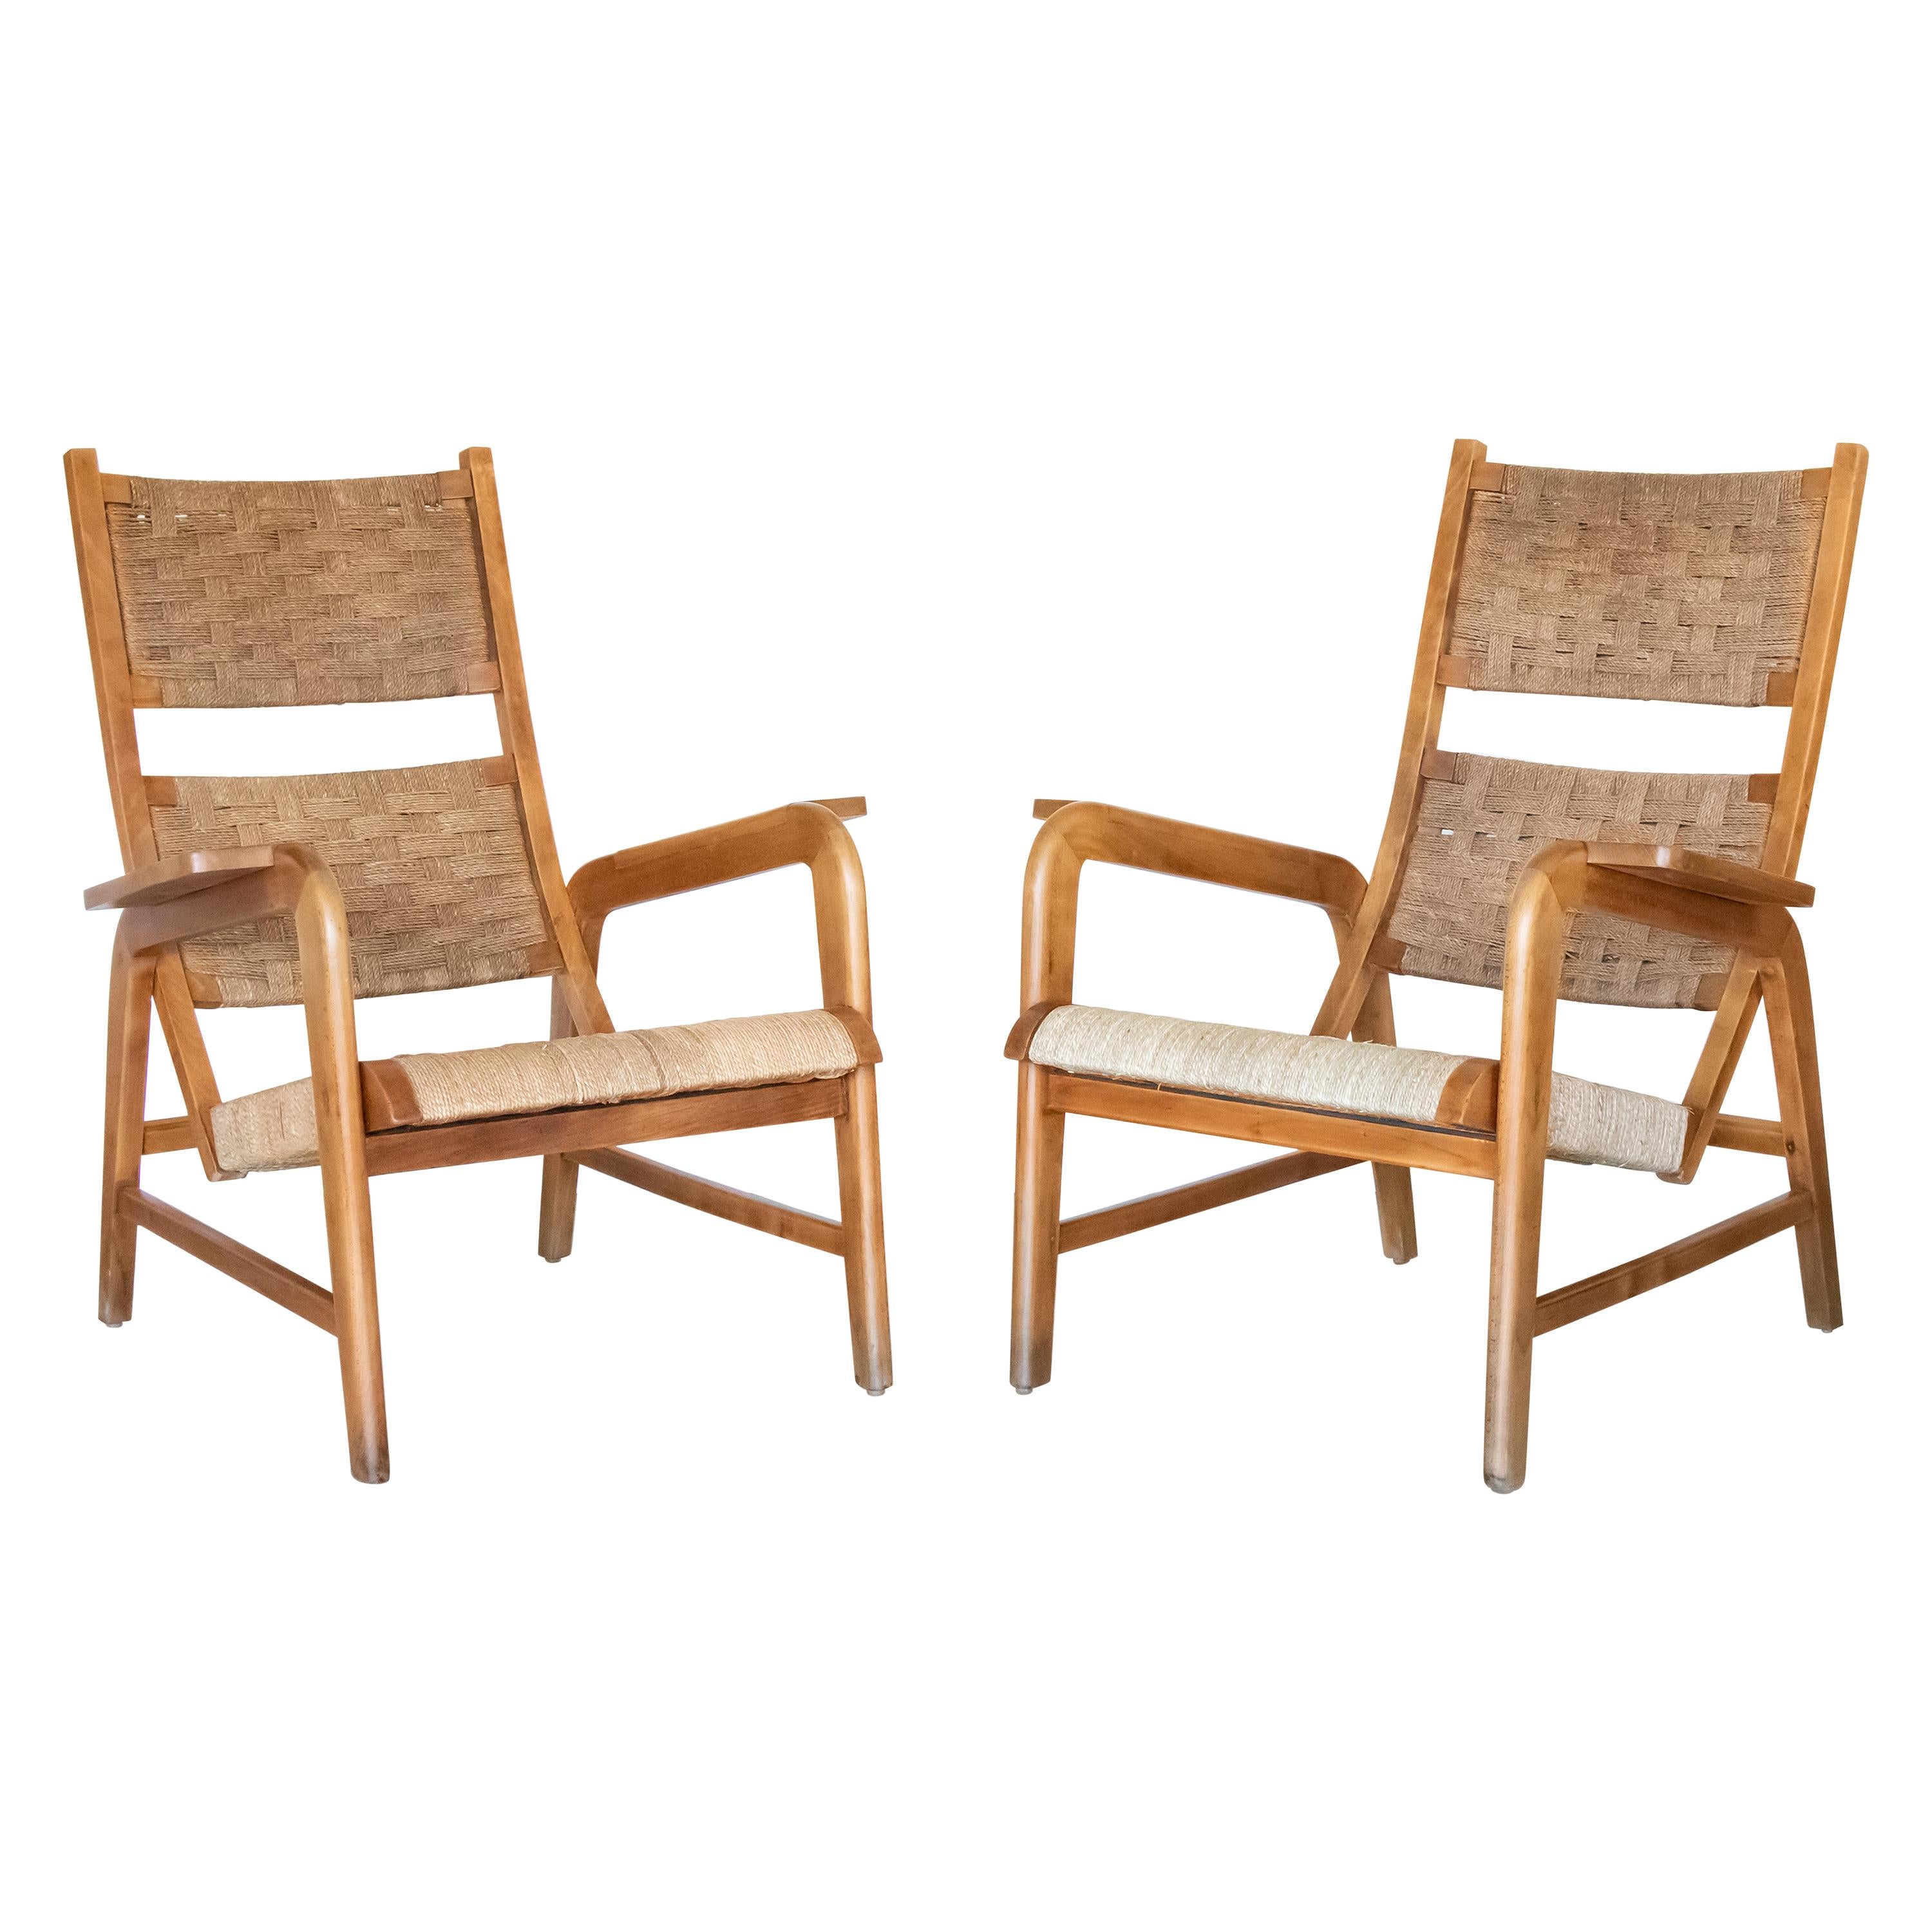 Italian 1940's Wood and Woven Lounge Chairs